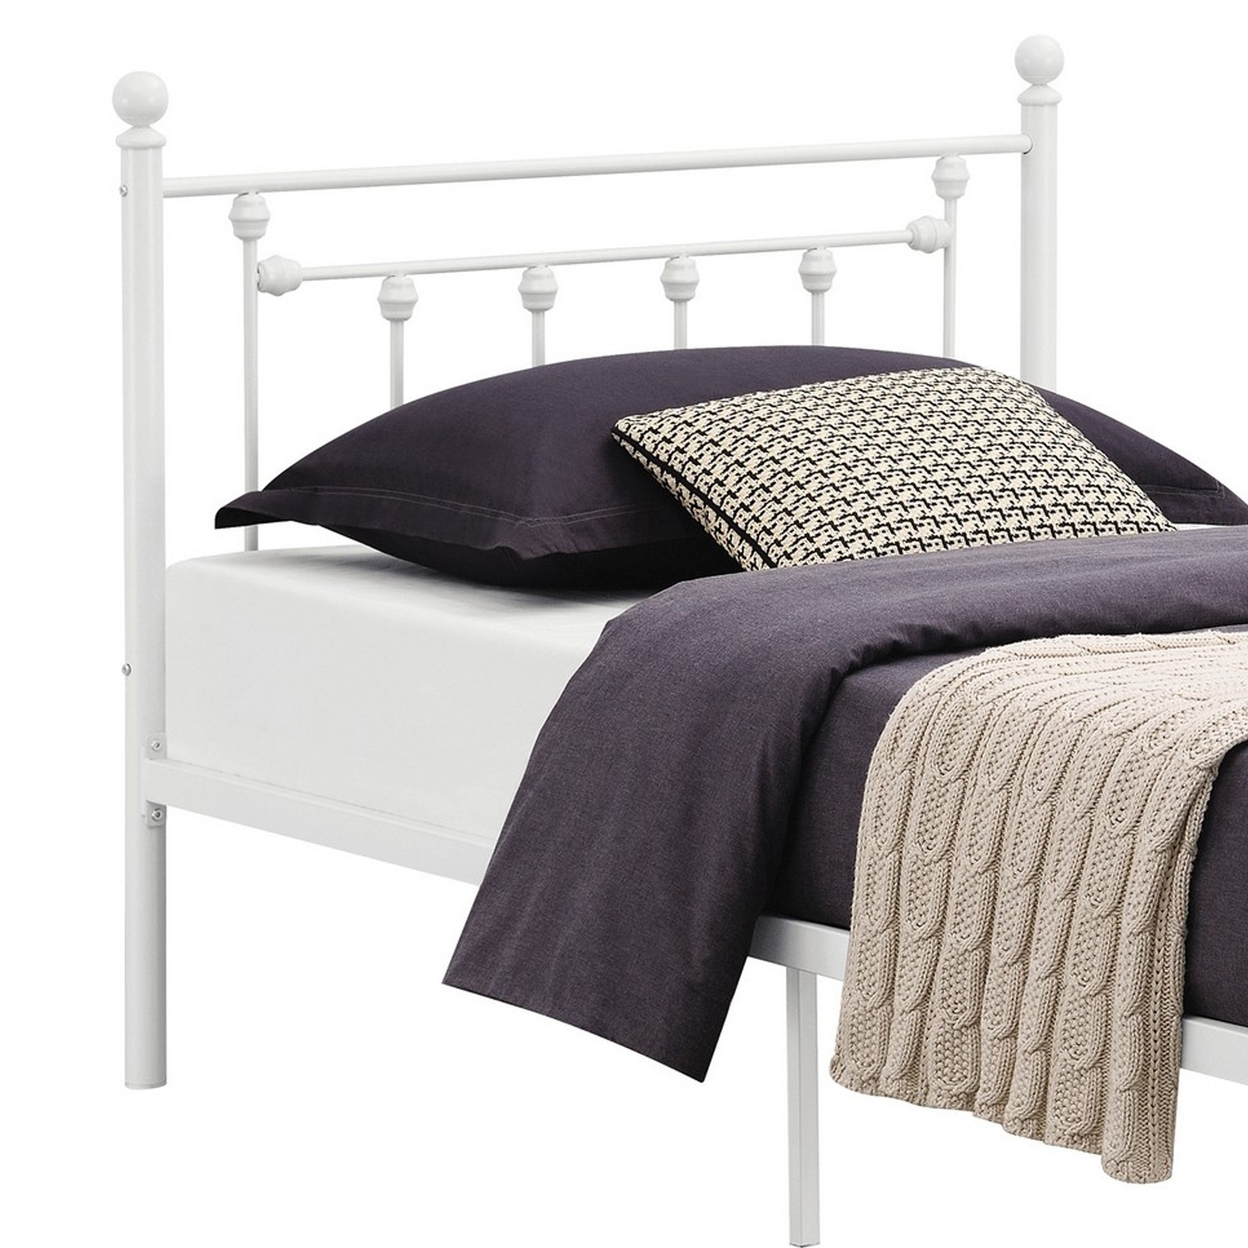 Dio 79 Inch Metal Full Size Bed Frame, Spindle Design, Finial Posts, White